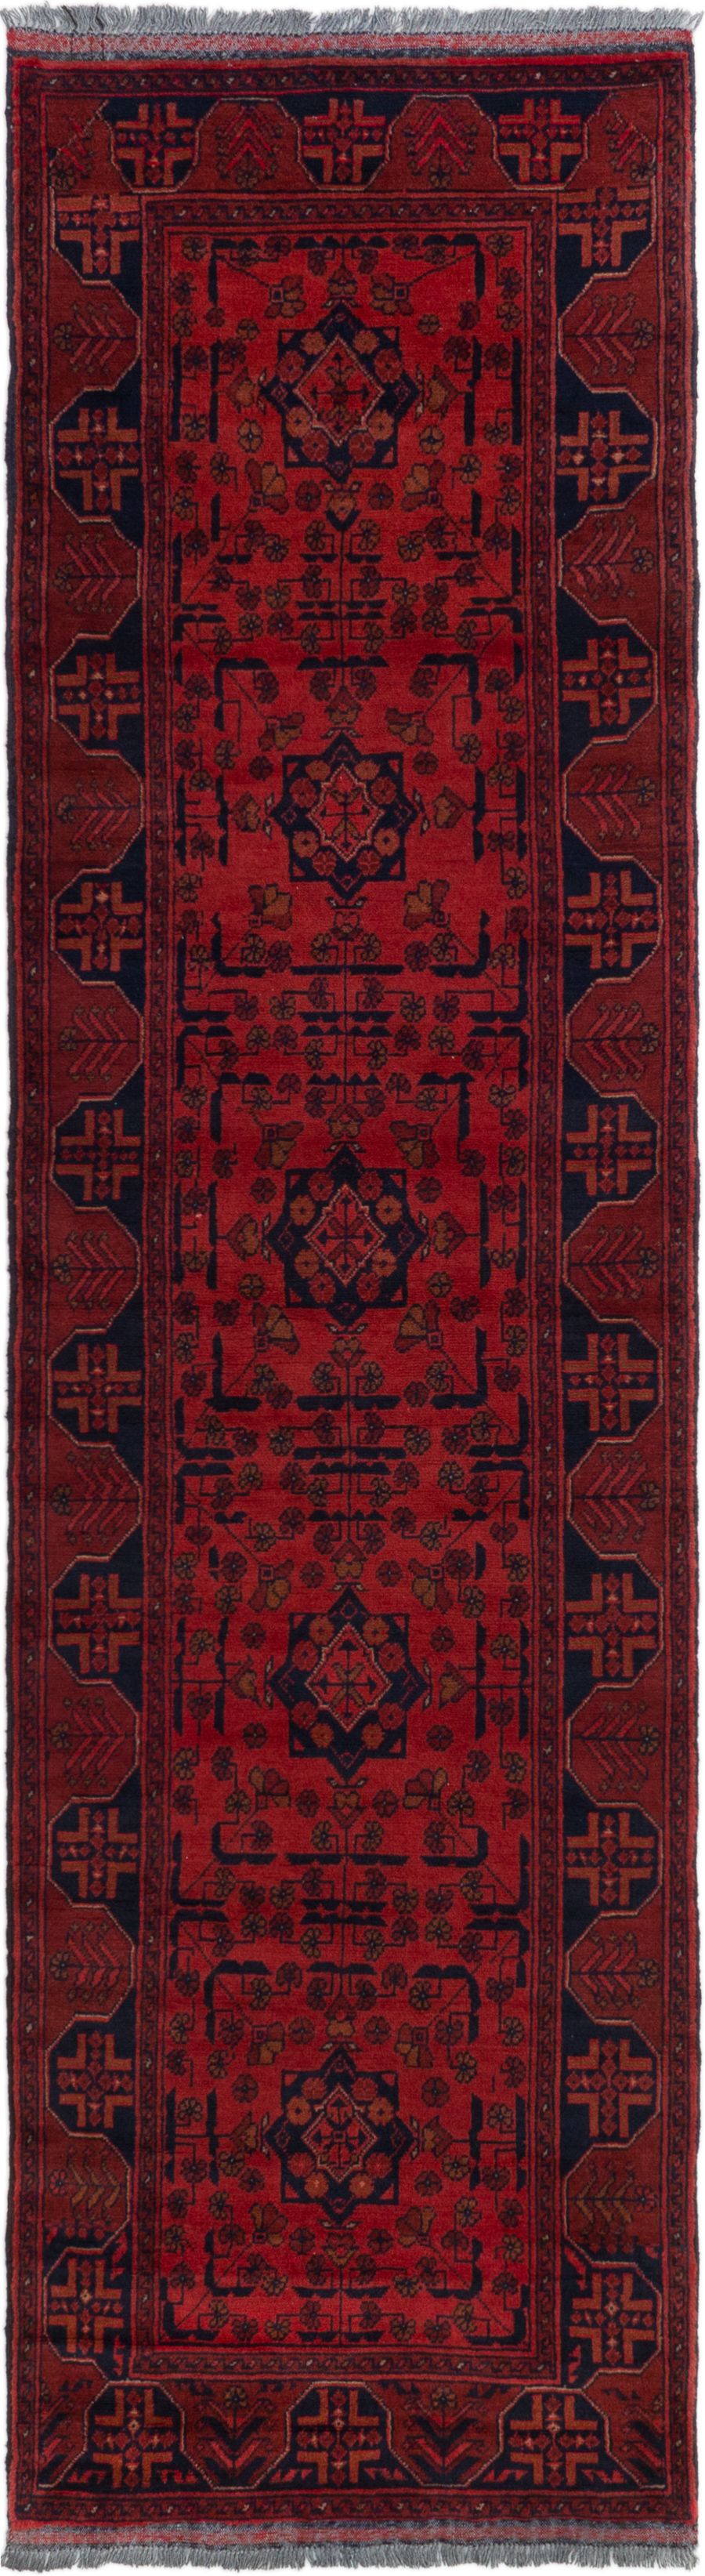 Hand-knotted Finest Khal Mohammadi Red Wool Rug 2'7" x 9'3"  Size: 2'7" x 9'3"  